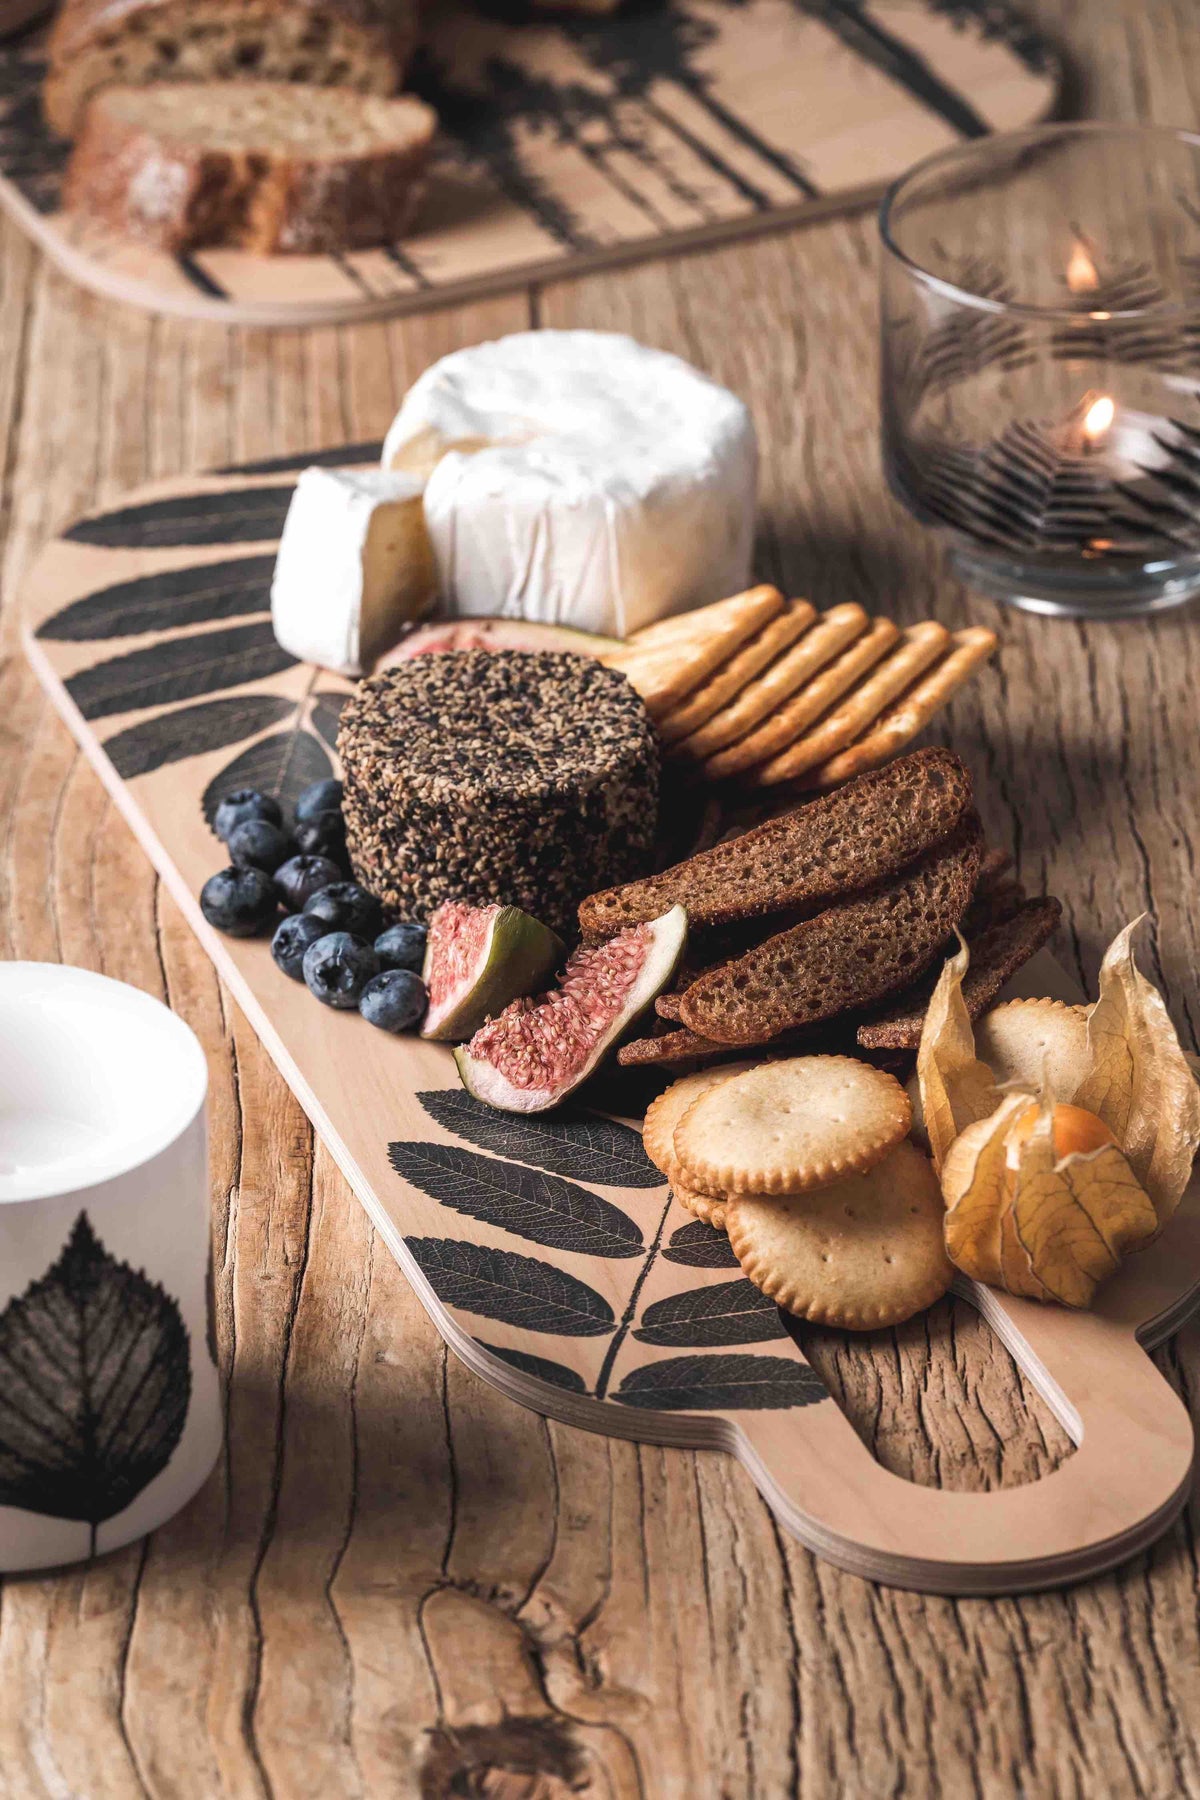 Muurla Nordic Chop and Serve Board filled with cheese, meats and biscuits!